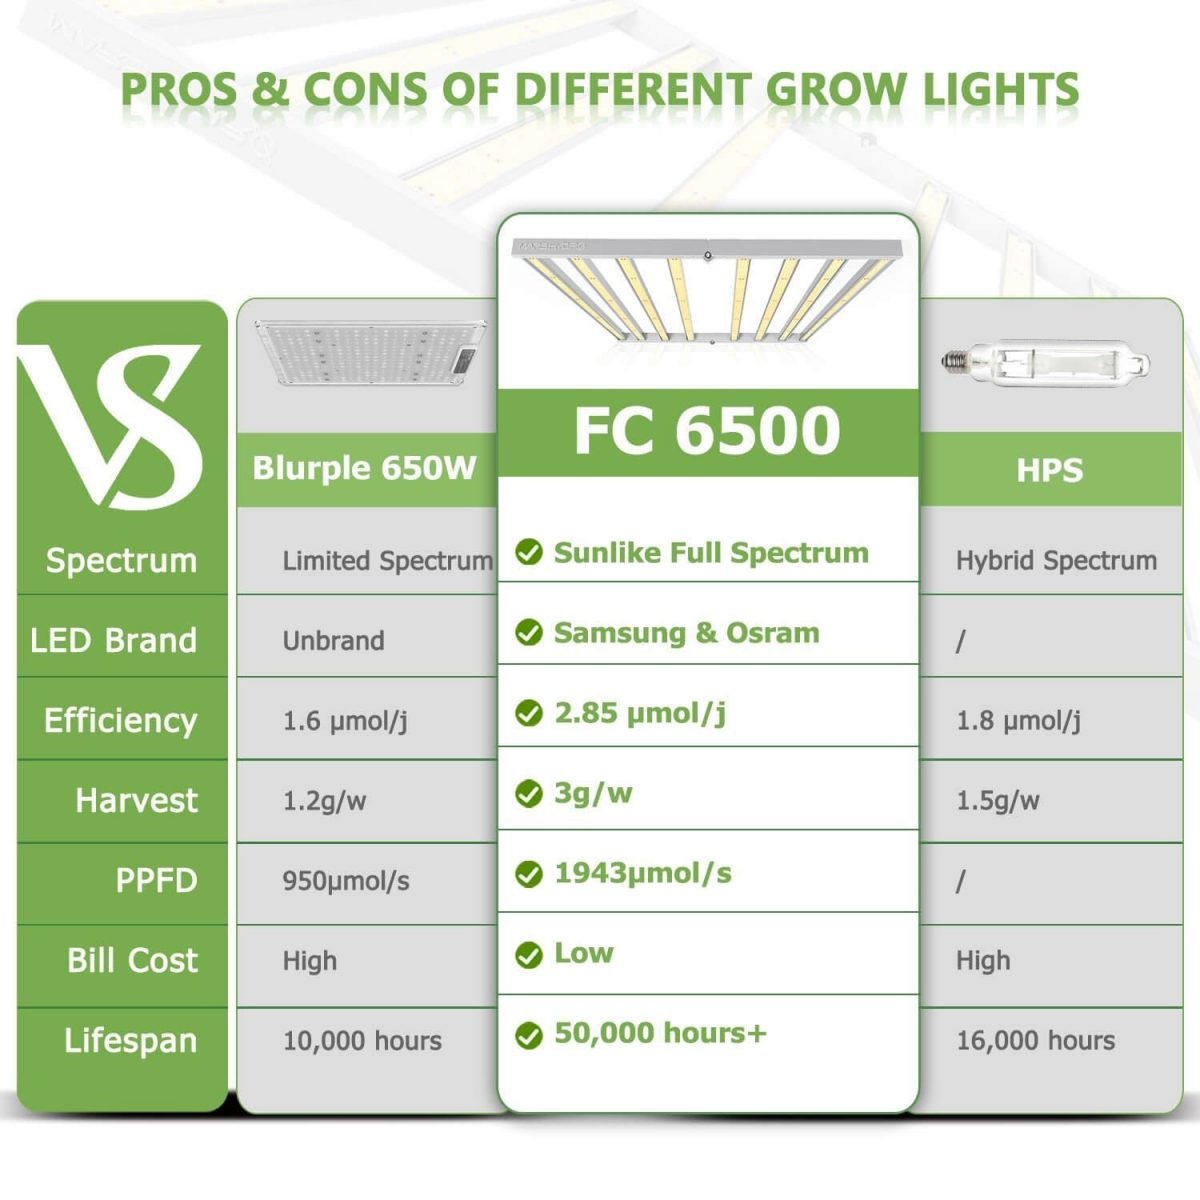 FC6500 led grow light performs much better than other 650w lights in power draw, diode brand, PPE, max yield.